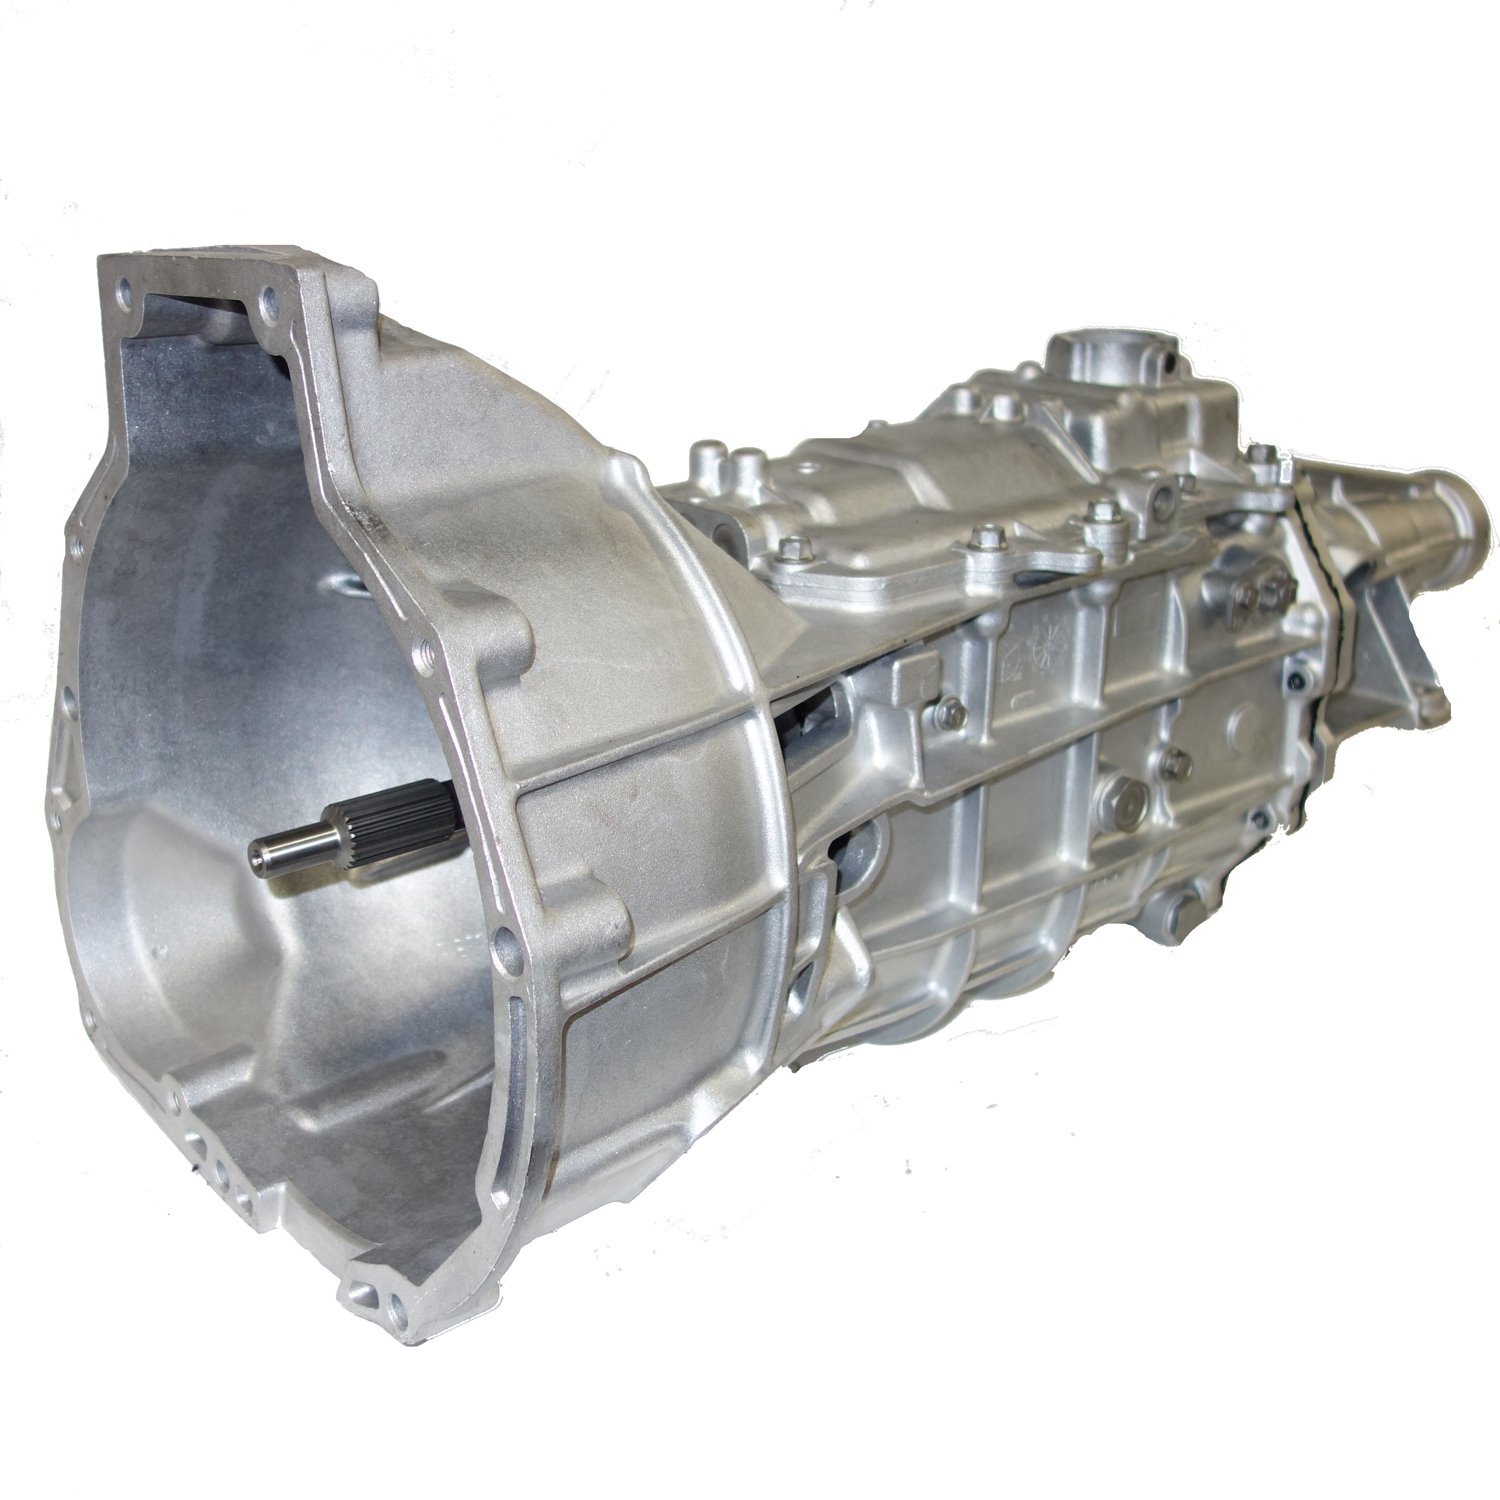 Remanufactured M5R1 Manual Transmission for Ford 95-97 Ranger & B-series 4.0L, 2WD, 6 Tooth